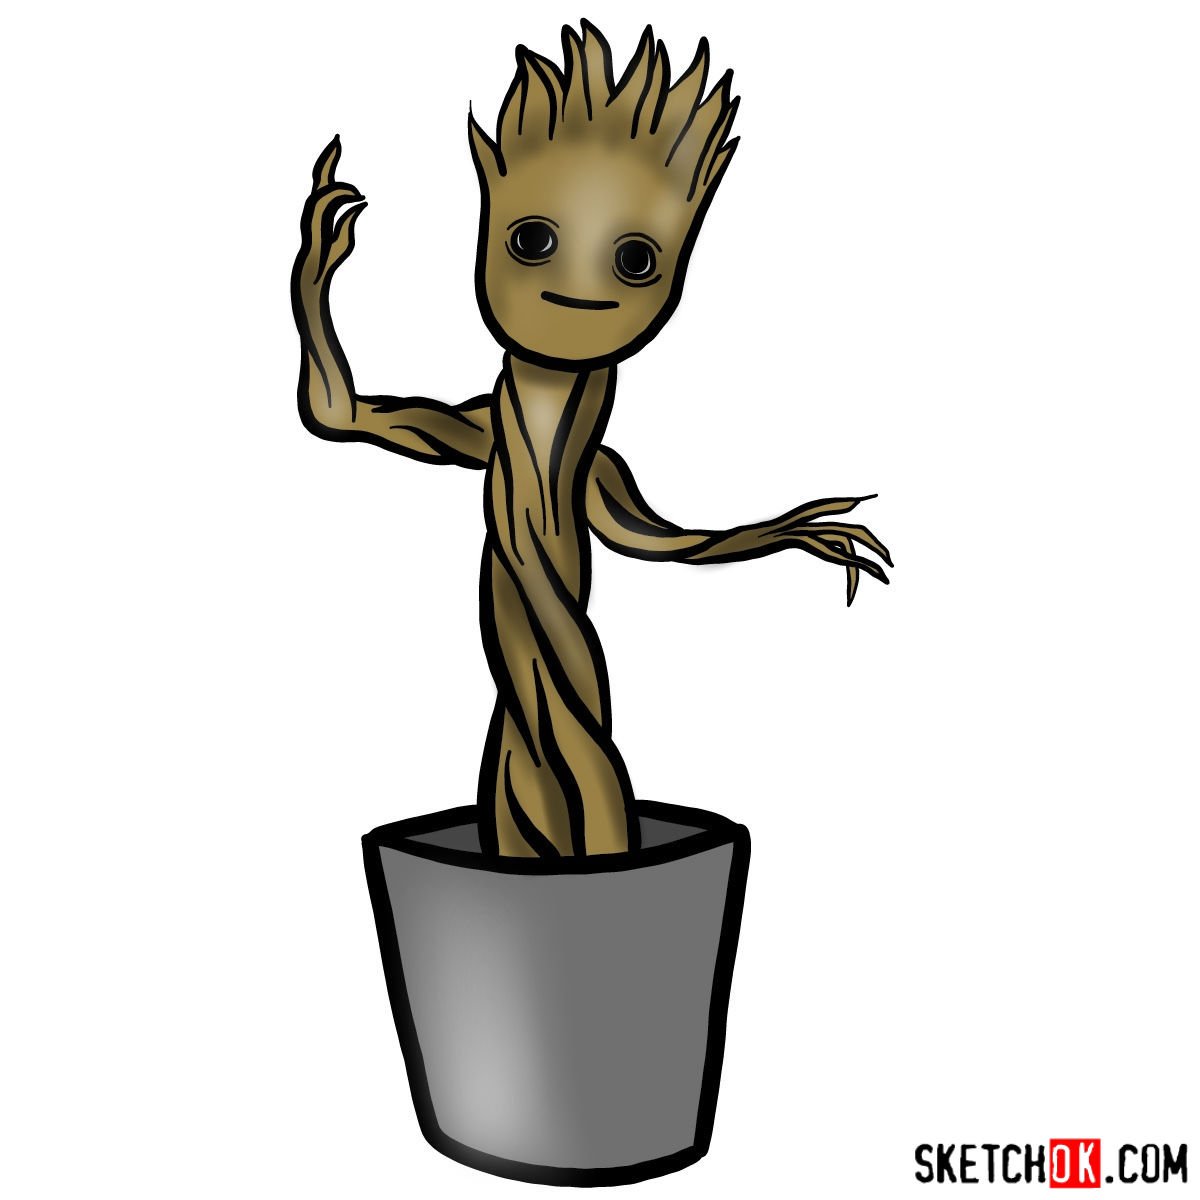 How to draw Baby Groot in a pot - Sketchok easy drawing guides